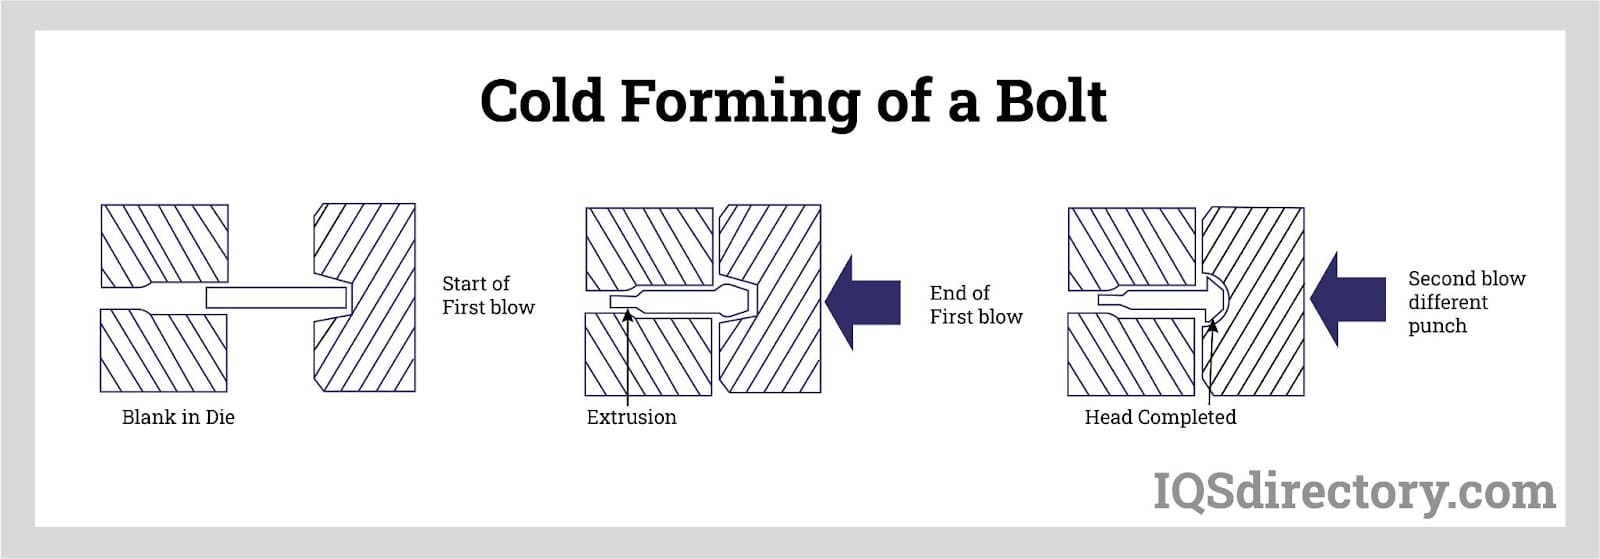 cold forming of a bolt